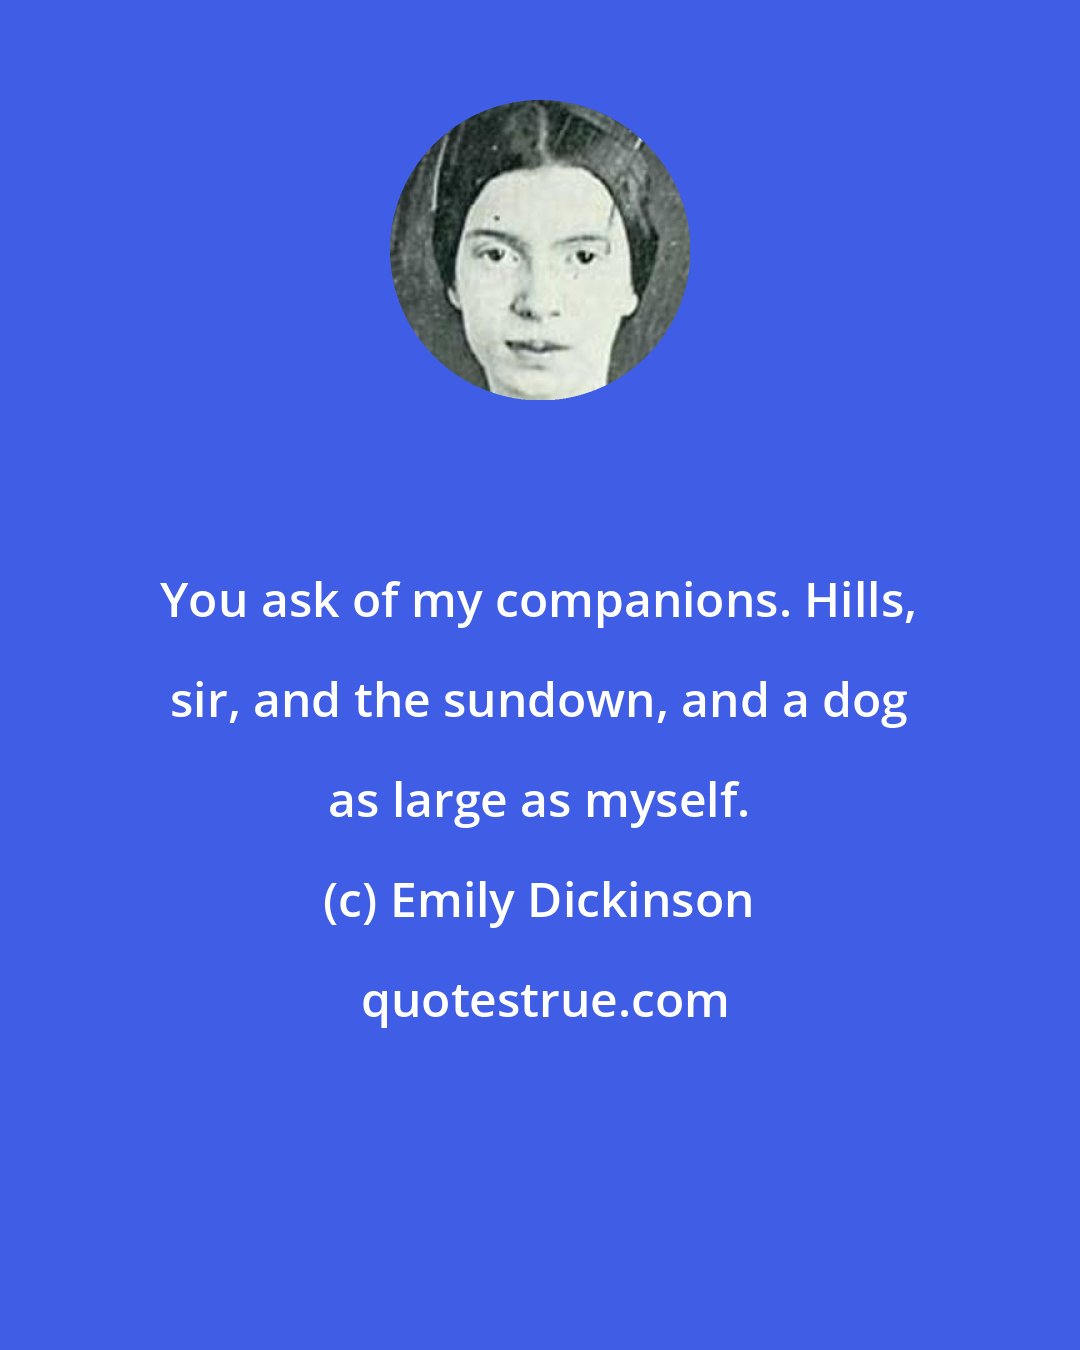 Emily Dickinson: You ask of my companions. Hills, sir, and the sundown, and a dog as large as myself.